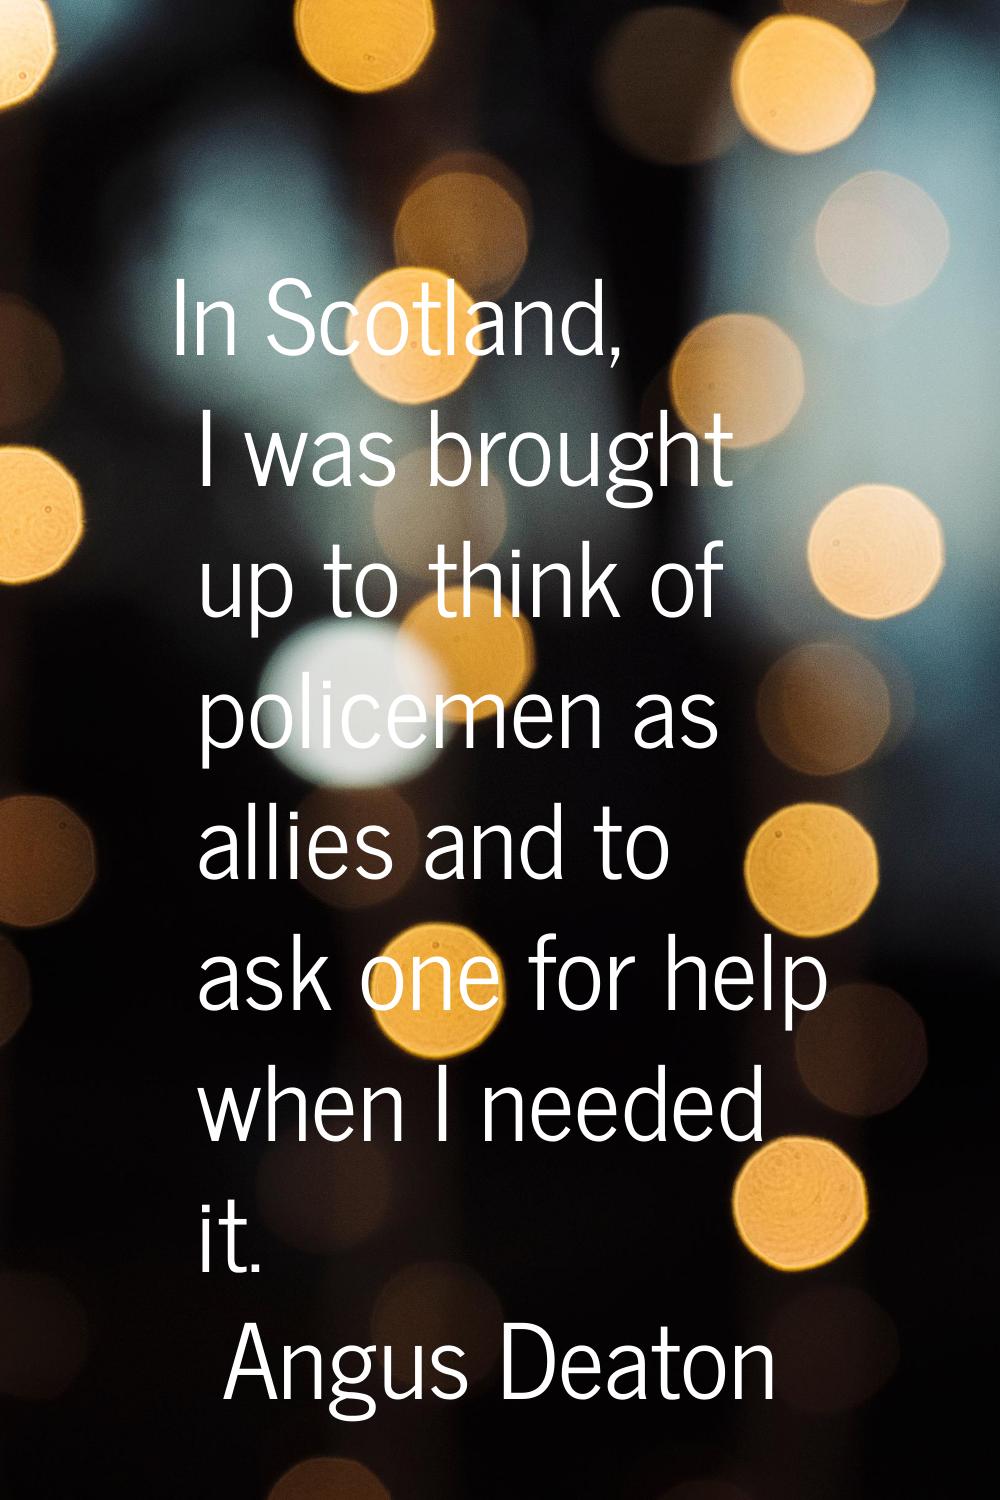 In Scotland, I was brought up to think of policemen as allies and to ask one for help when I needed